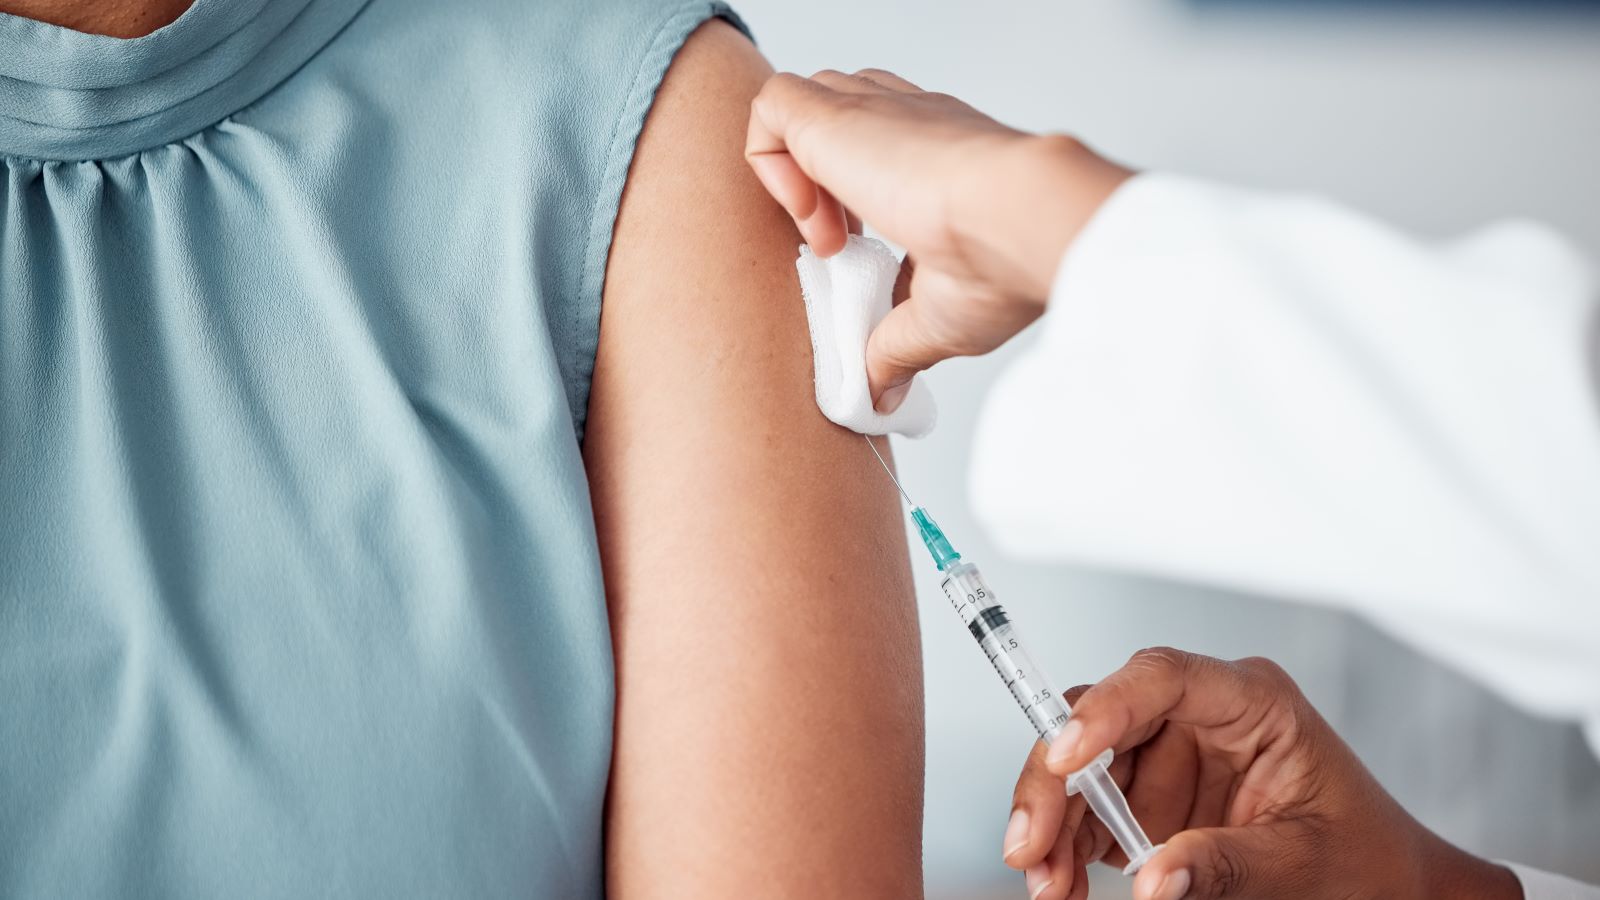 What You Need to Know About the New Breast Cancer Vaccine